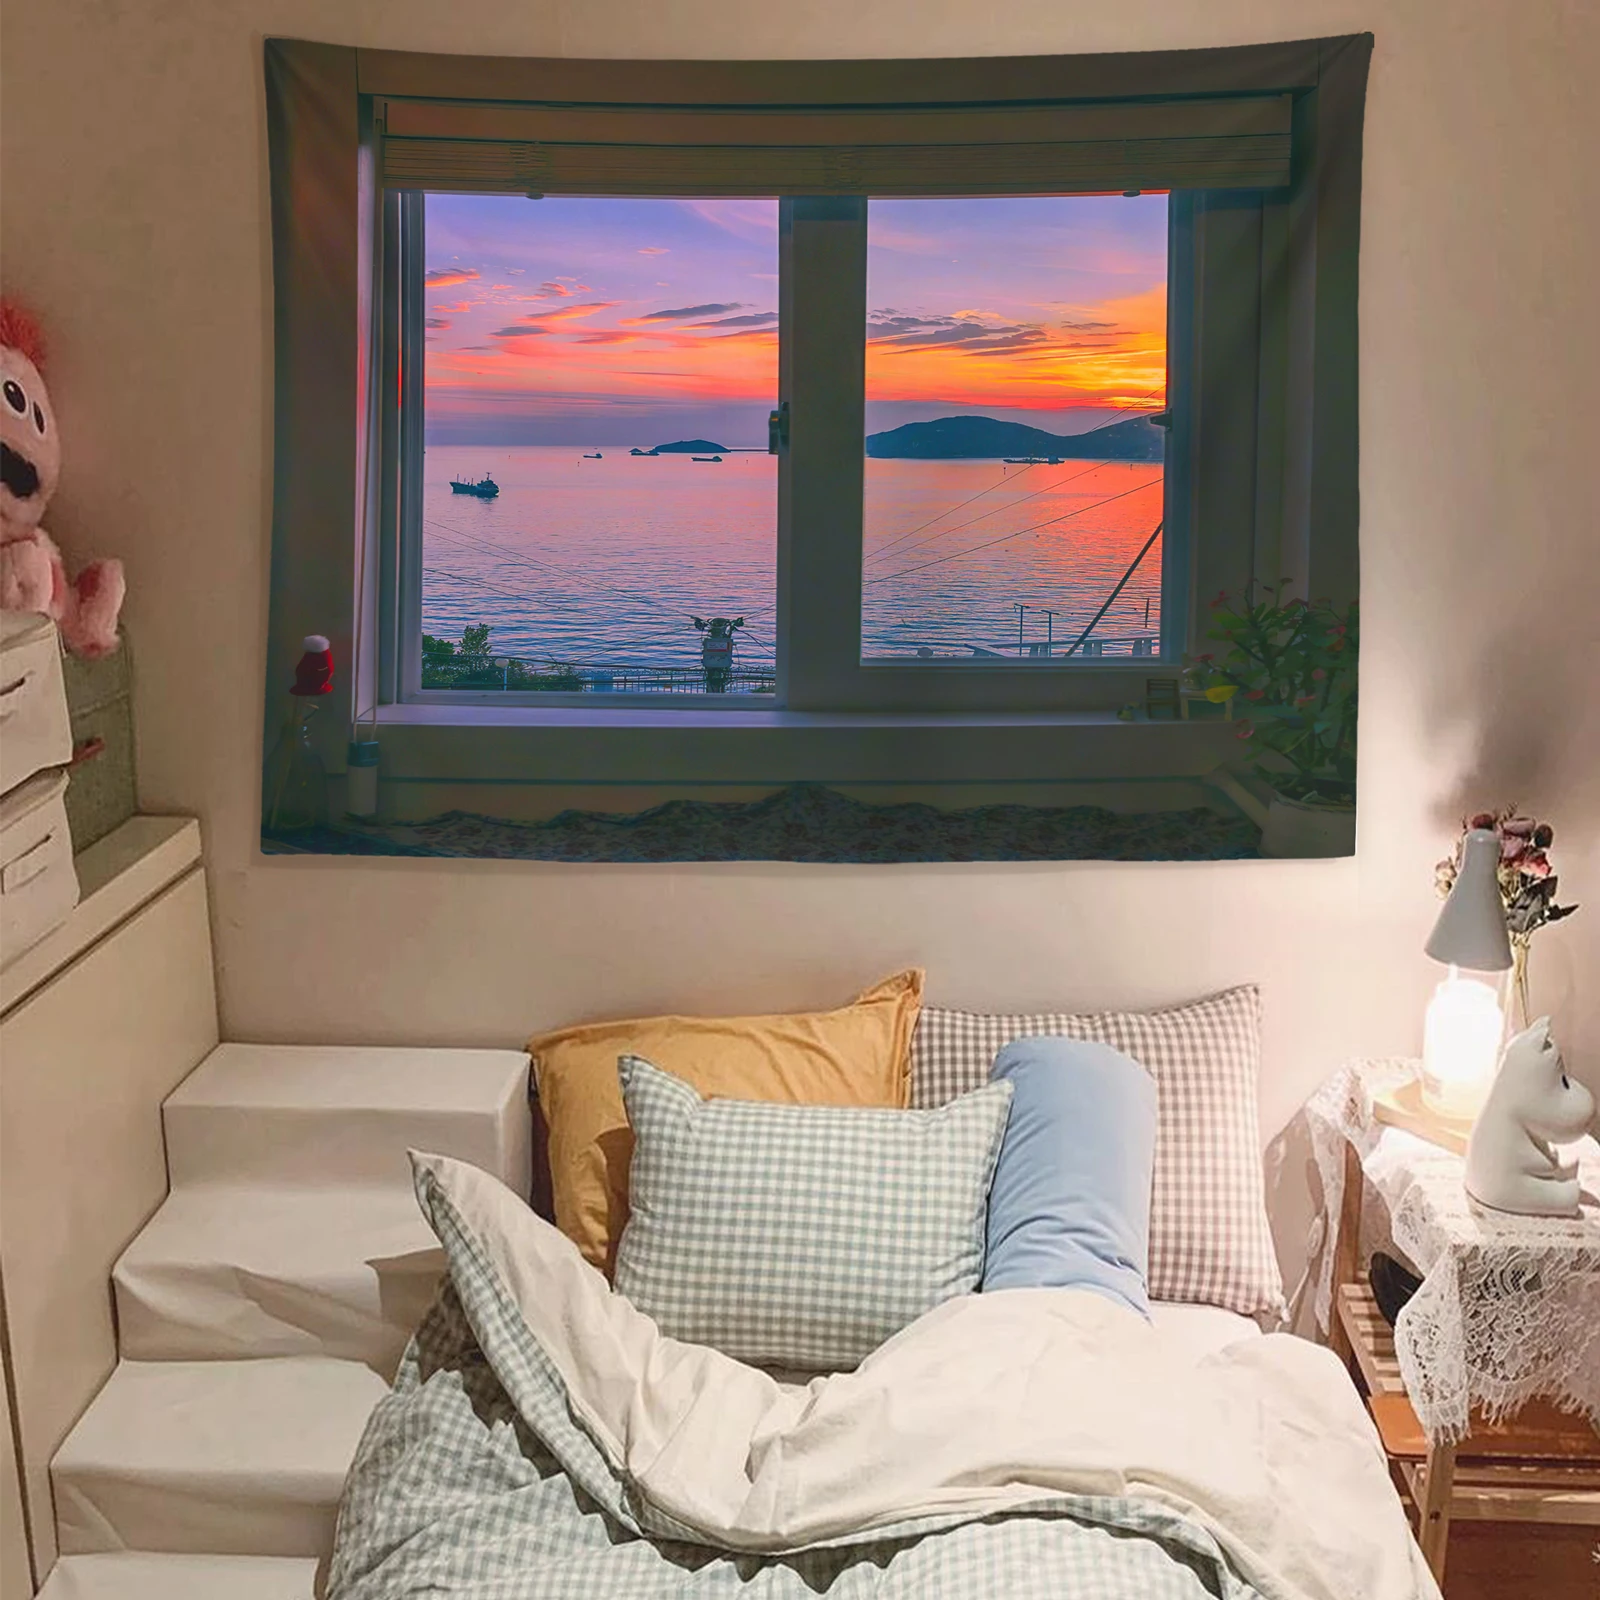 

Sea View Window Background Tapestry Fresh Bedroom Bedside Dormitory Rental Homestay Decorative Wall Cloth Tapestry D718W